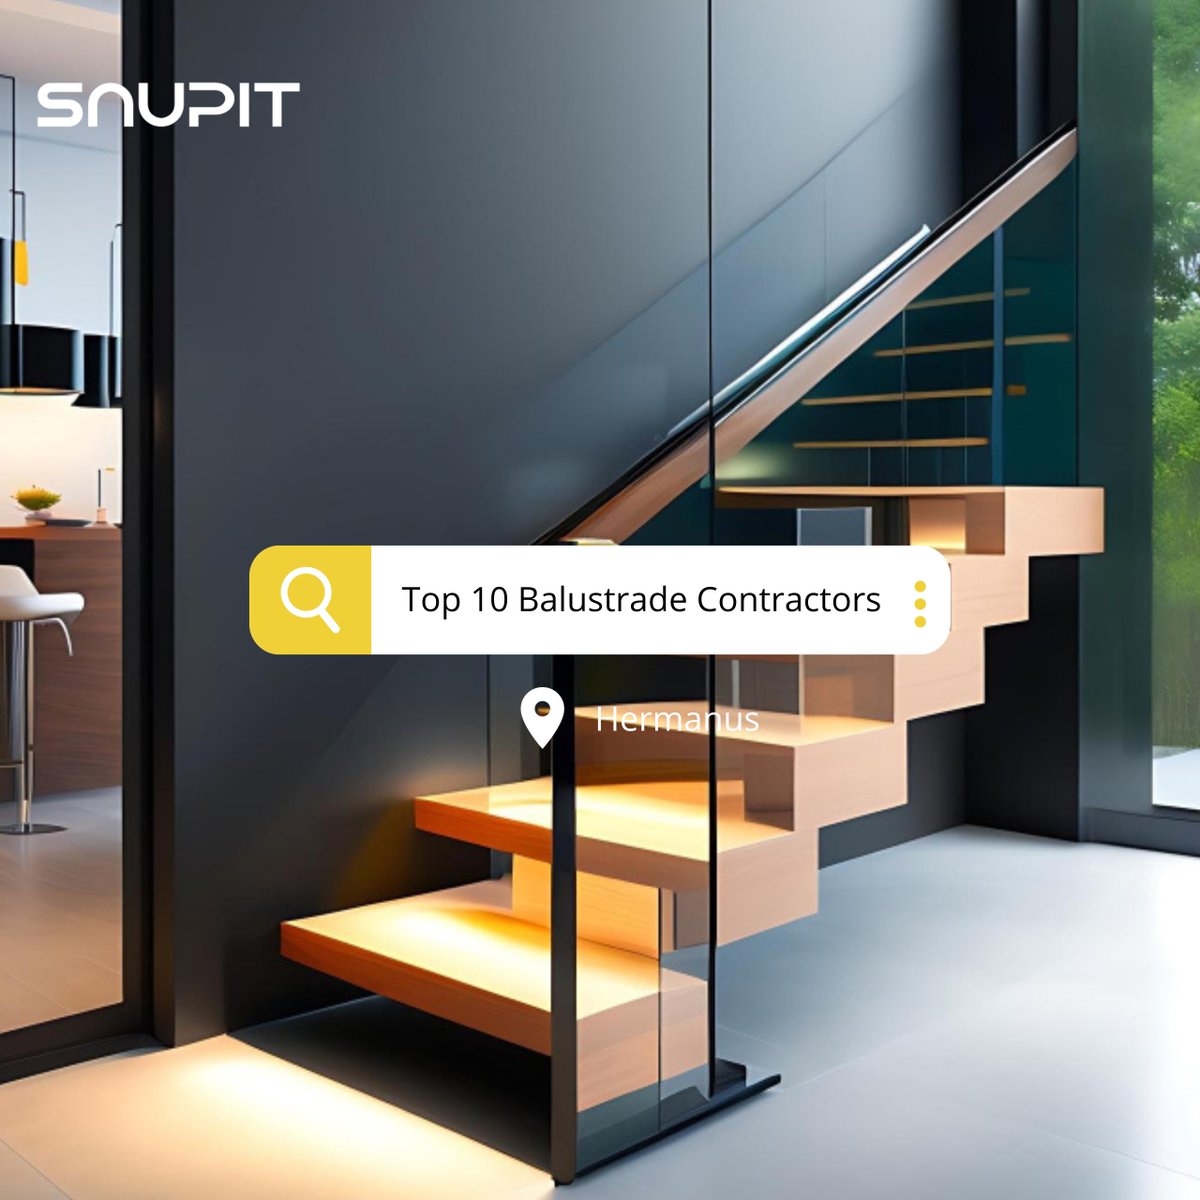 Balustrades can provide a beautiful feature and safety component to staircases, veranda's and balcony's.
#balustrades #balustradecontractors

For glass, stainless steel, wooden balustrades and more, request quotes from Balustrade Specialists on Snupit!
snupit.co.za/post-quote-req…